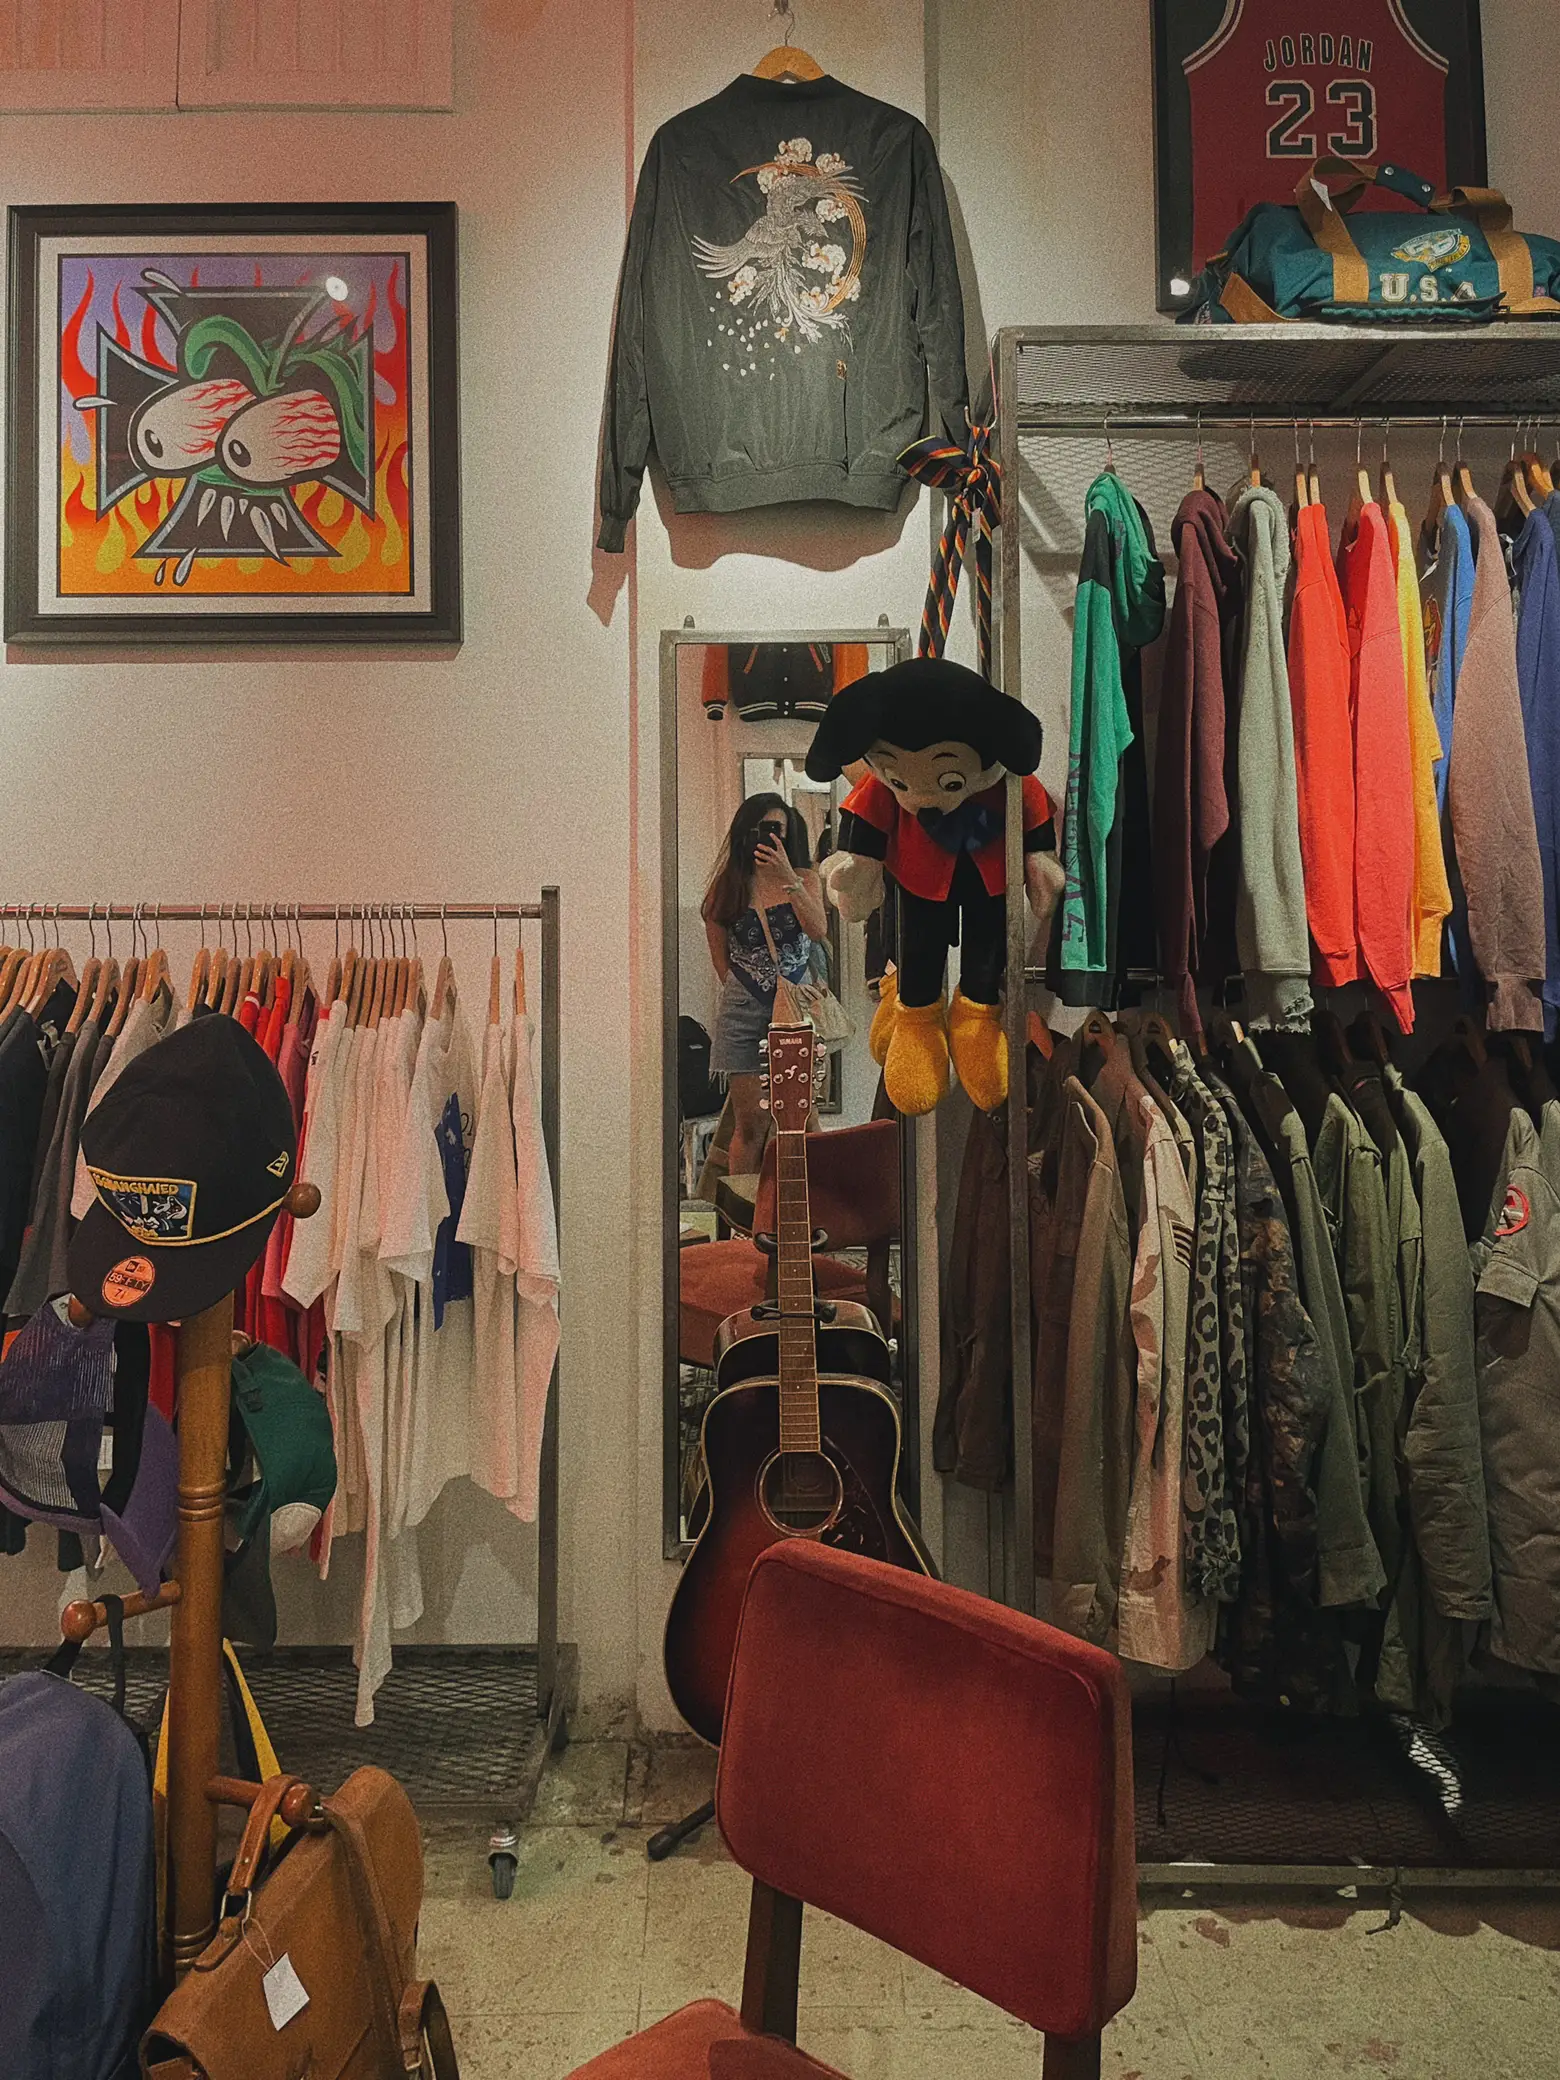 Thrift Shops In Penang: 10 Places To Find Pre-Loved & Vintage Outfits